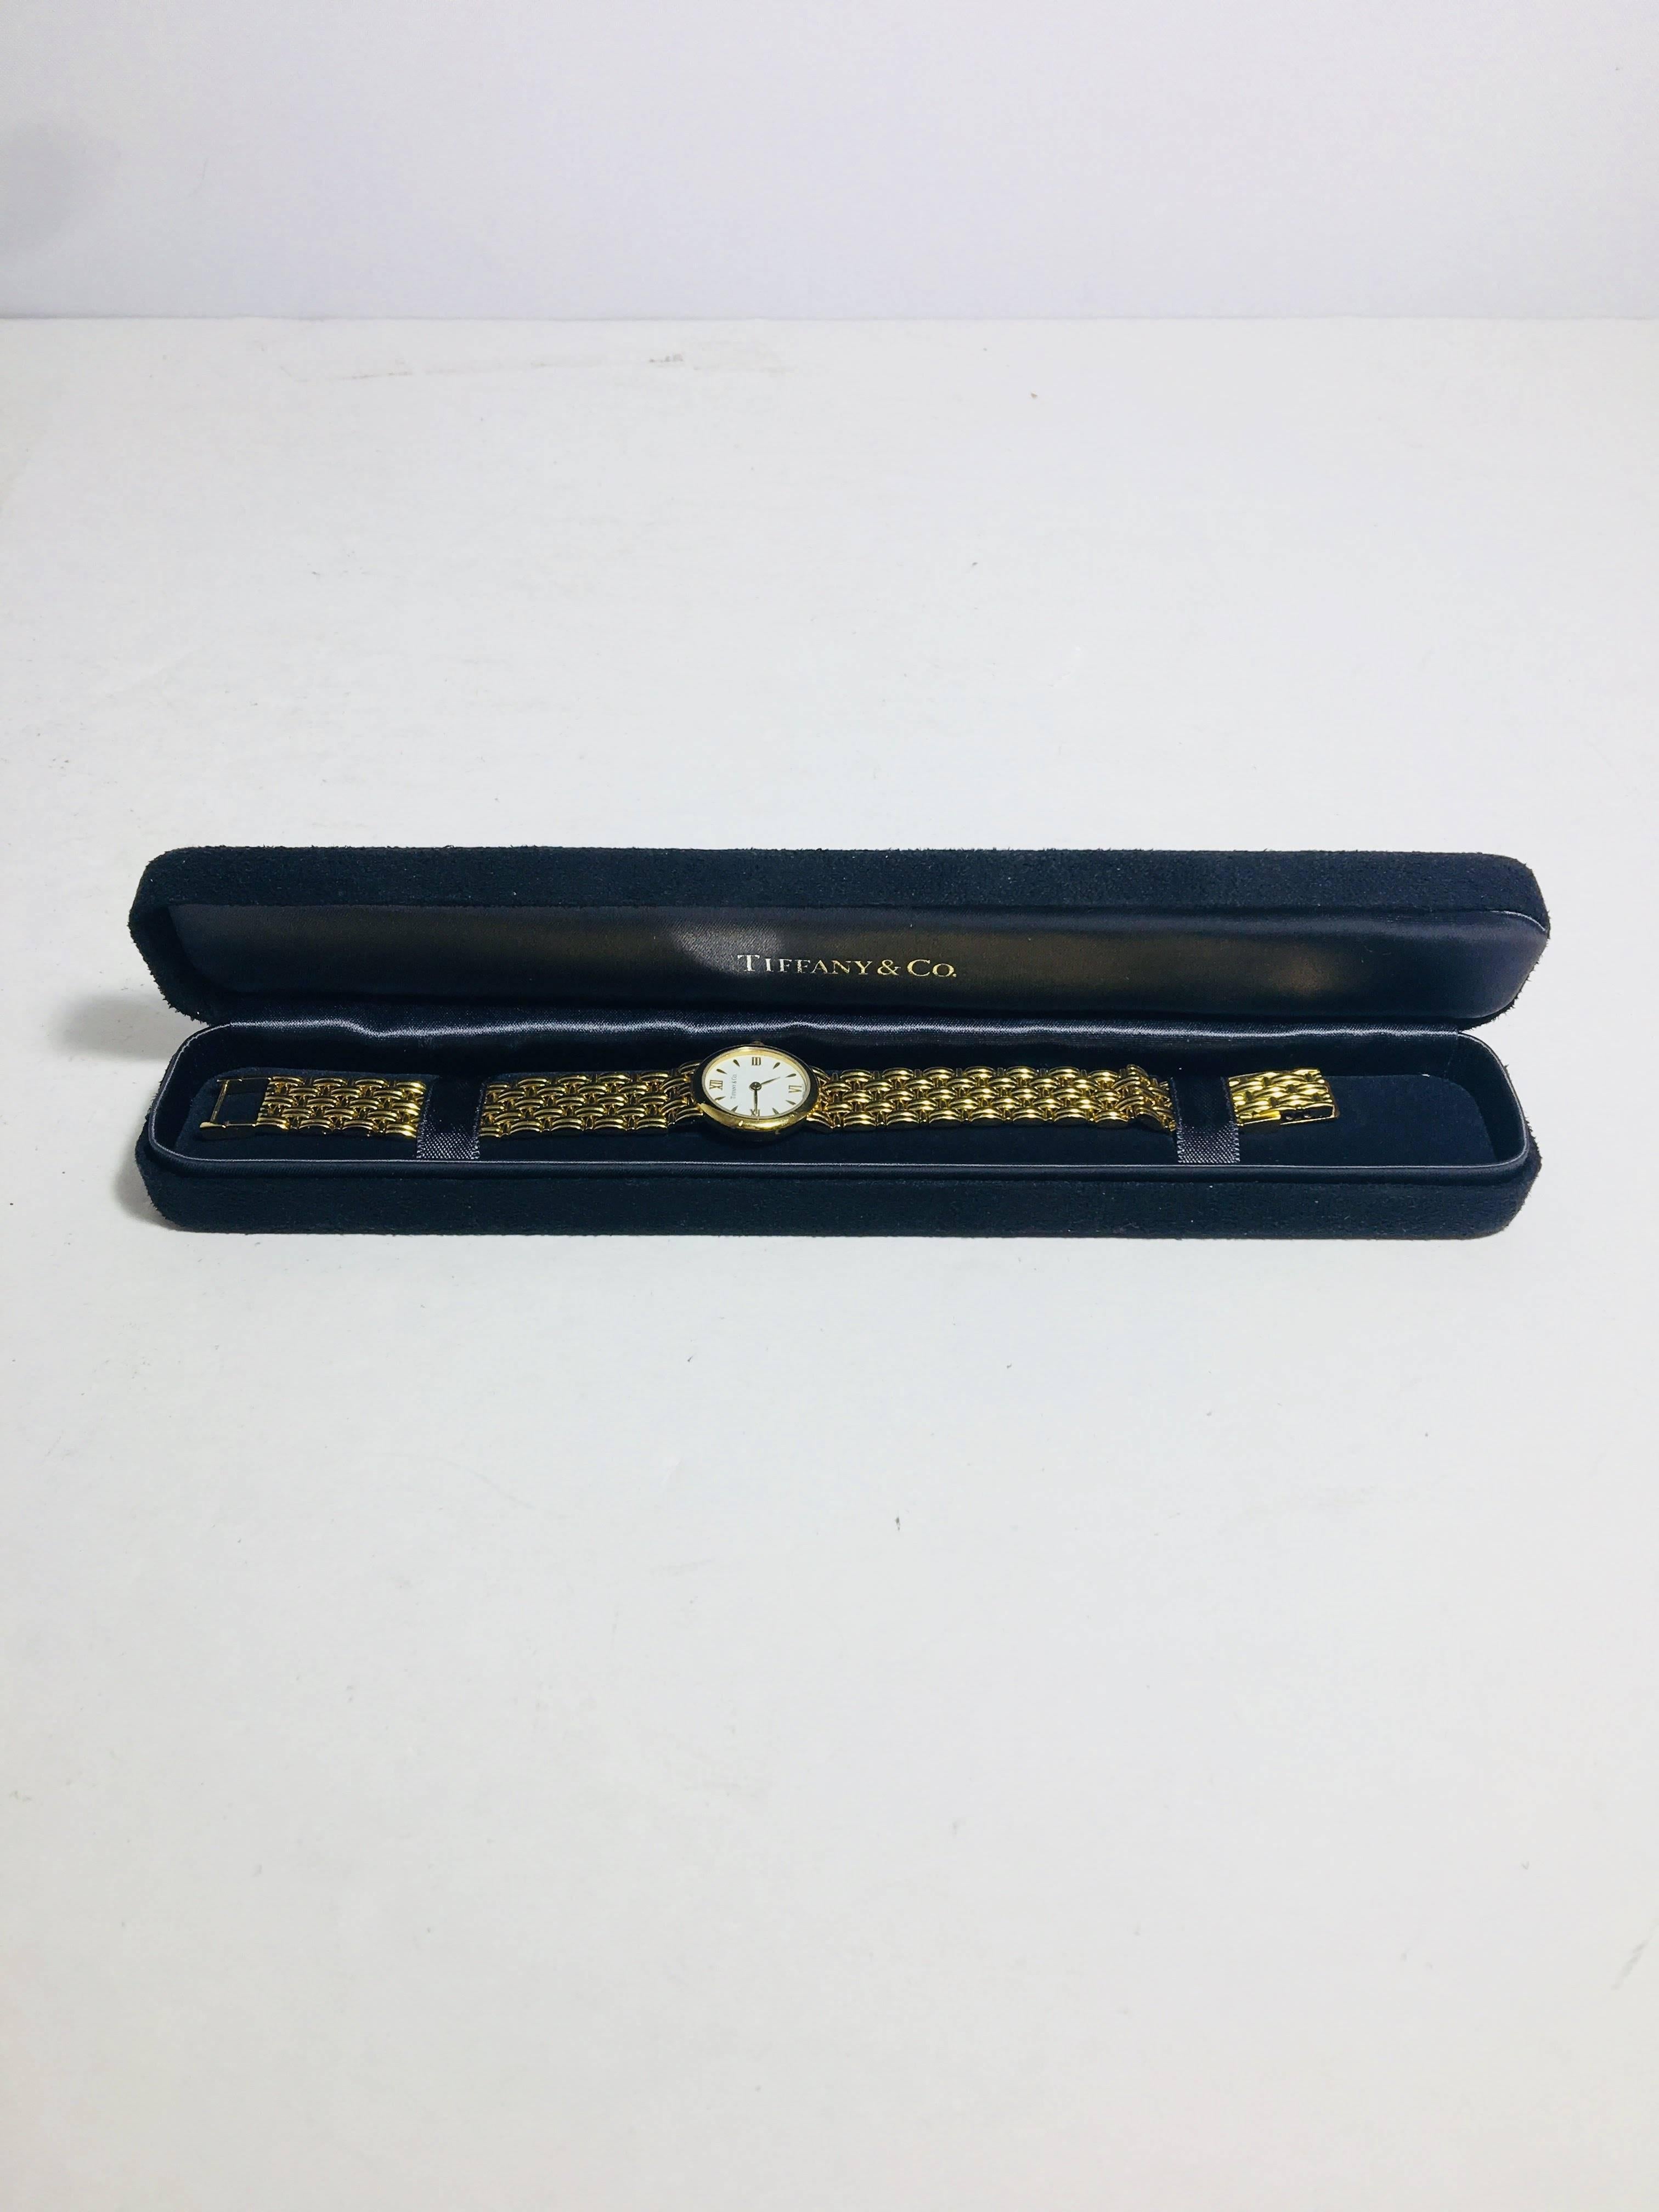 Tiffany & Co. 18k Gold Classic Watch with White Face.
Swiss Made, Water Resistant. With Original Box.